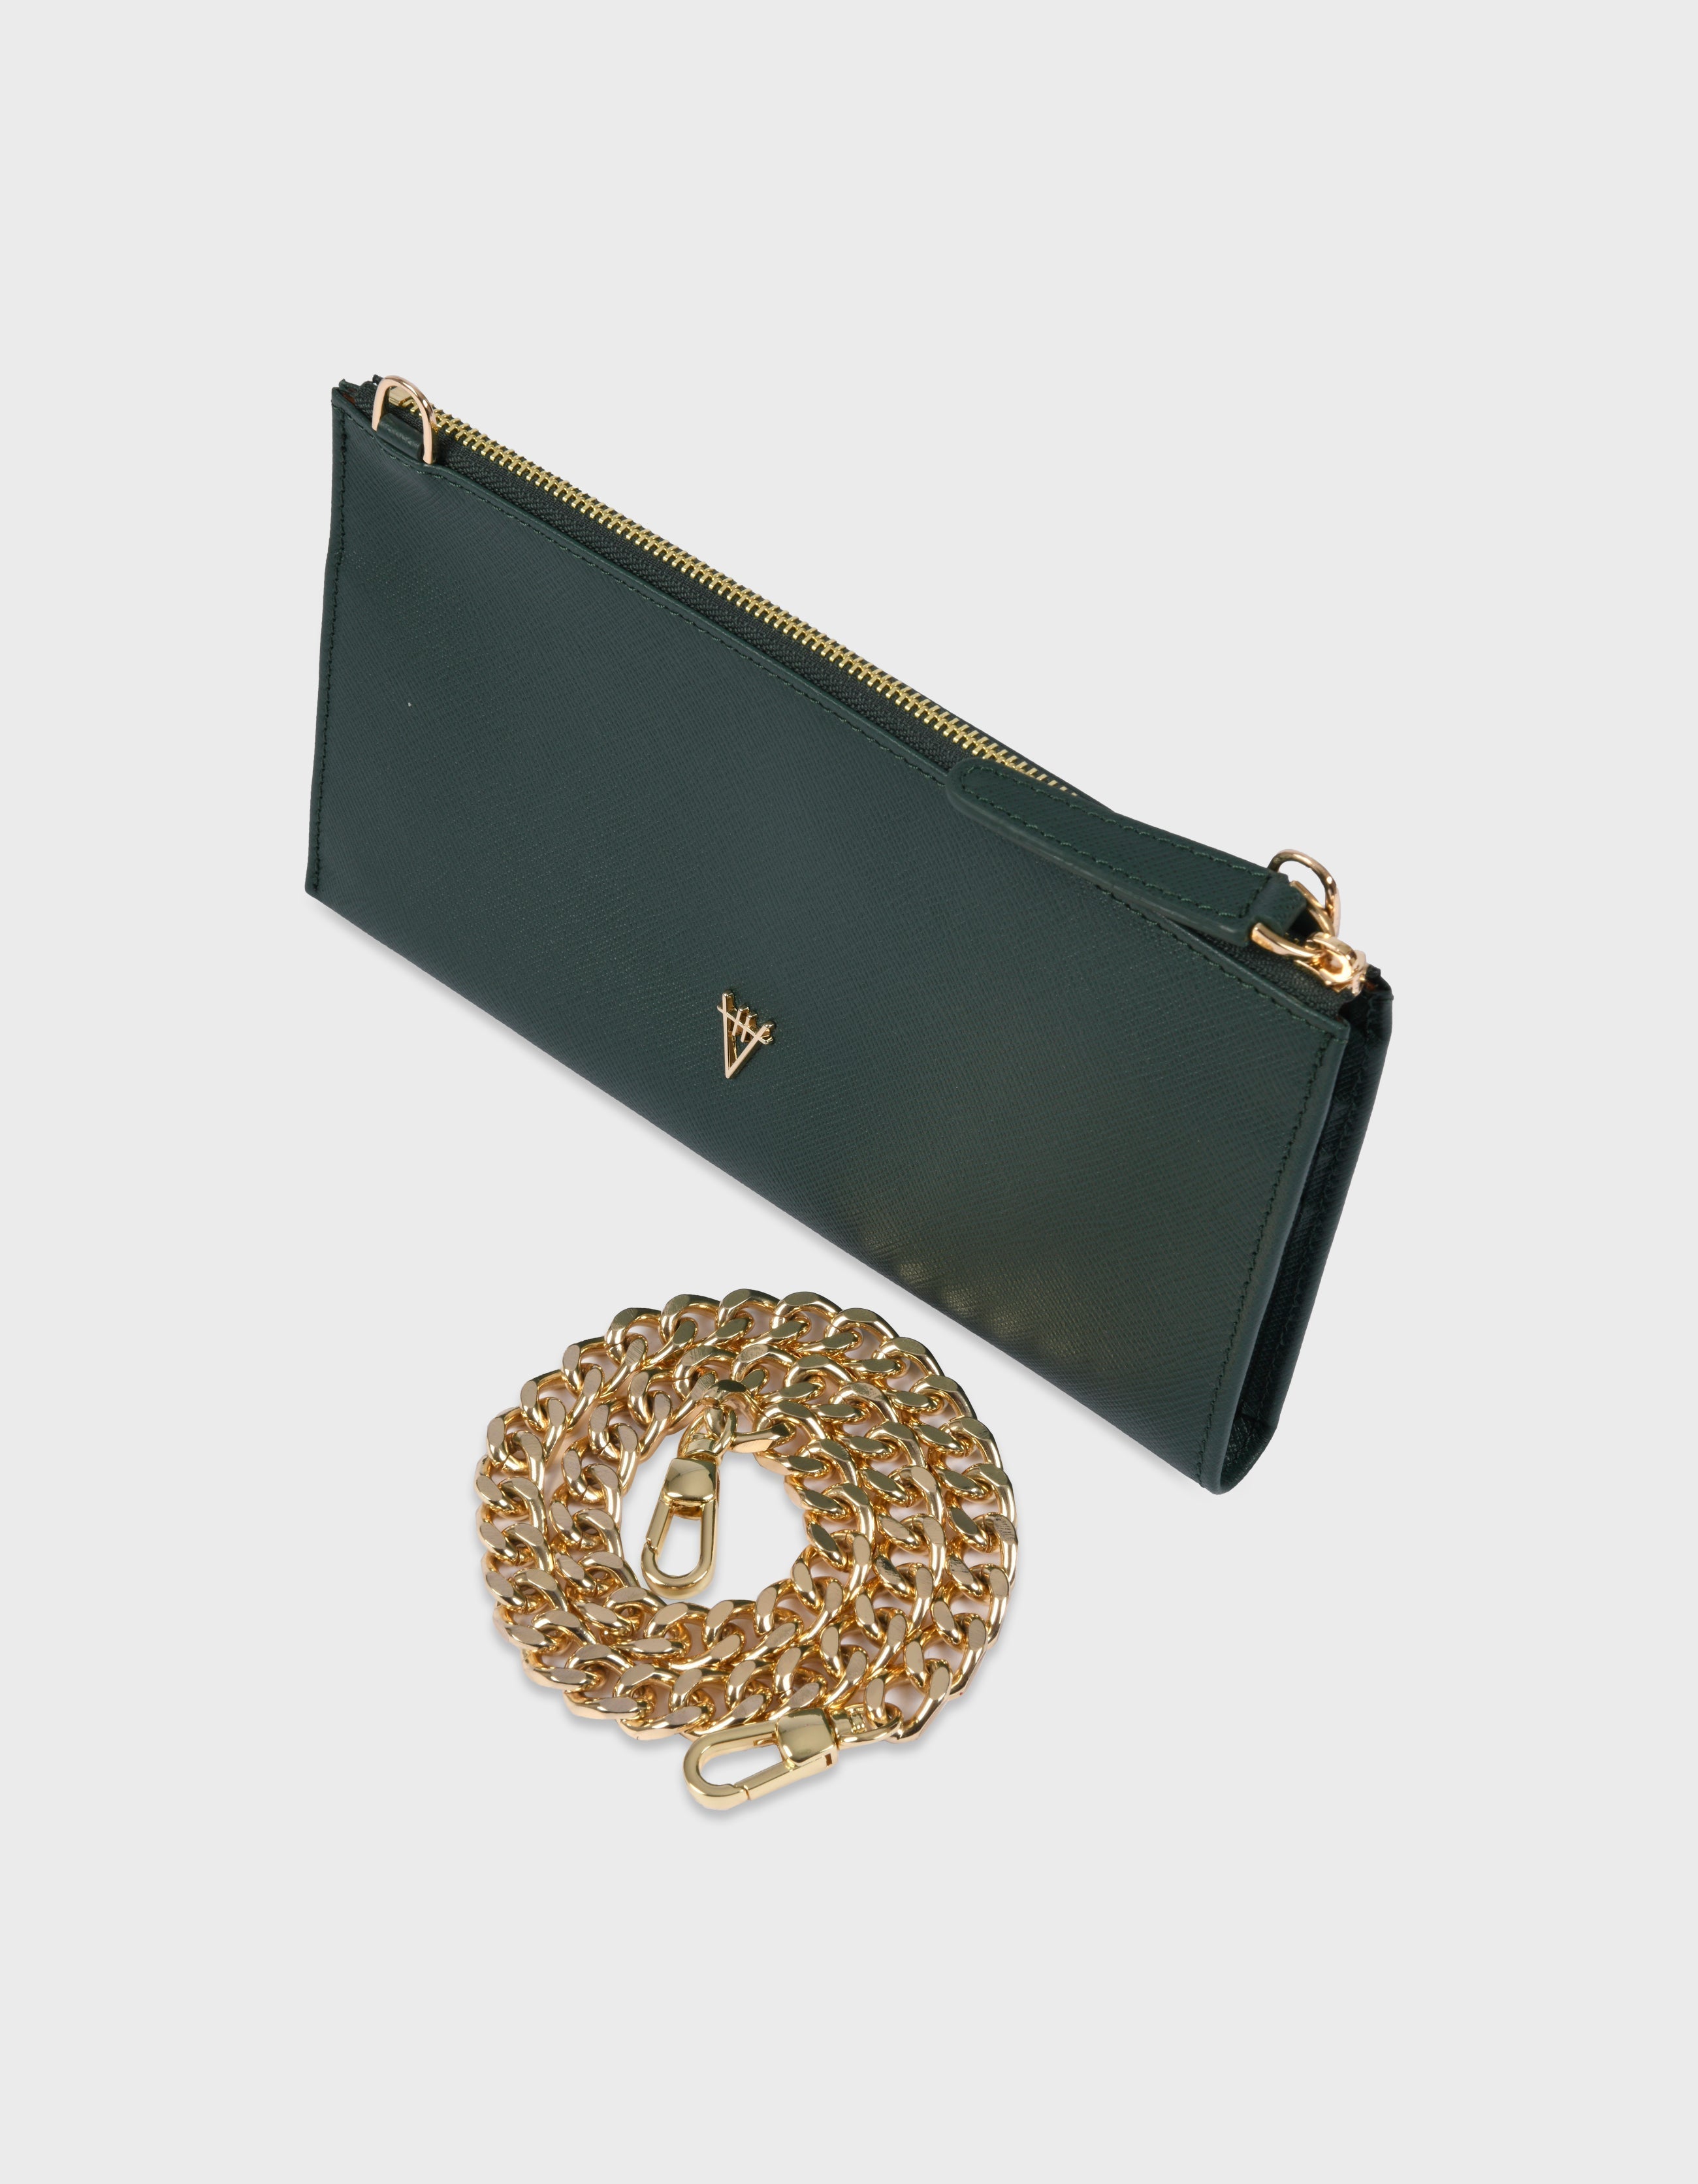 HiVa Atelier | Omnia Chain Bag & Clutch Forest Green | Beautiful and Versatile